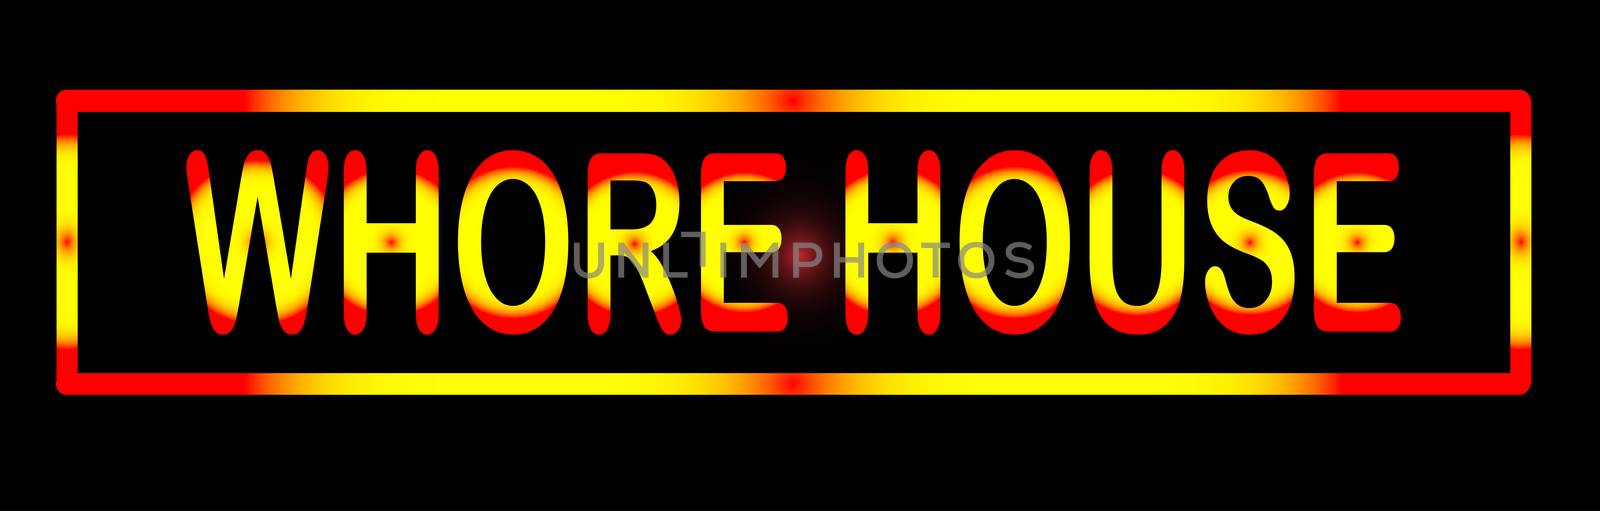 Neon whore house sign over a black background